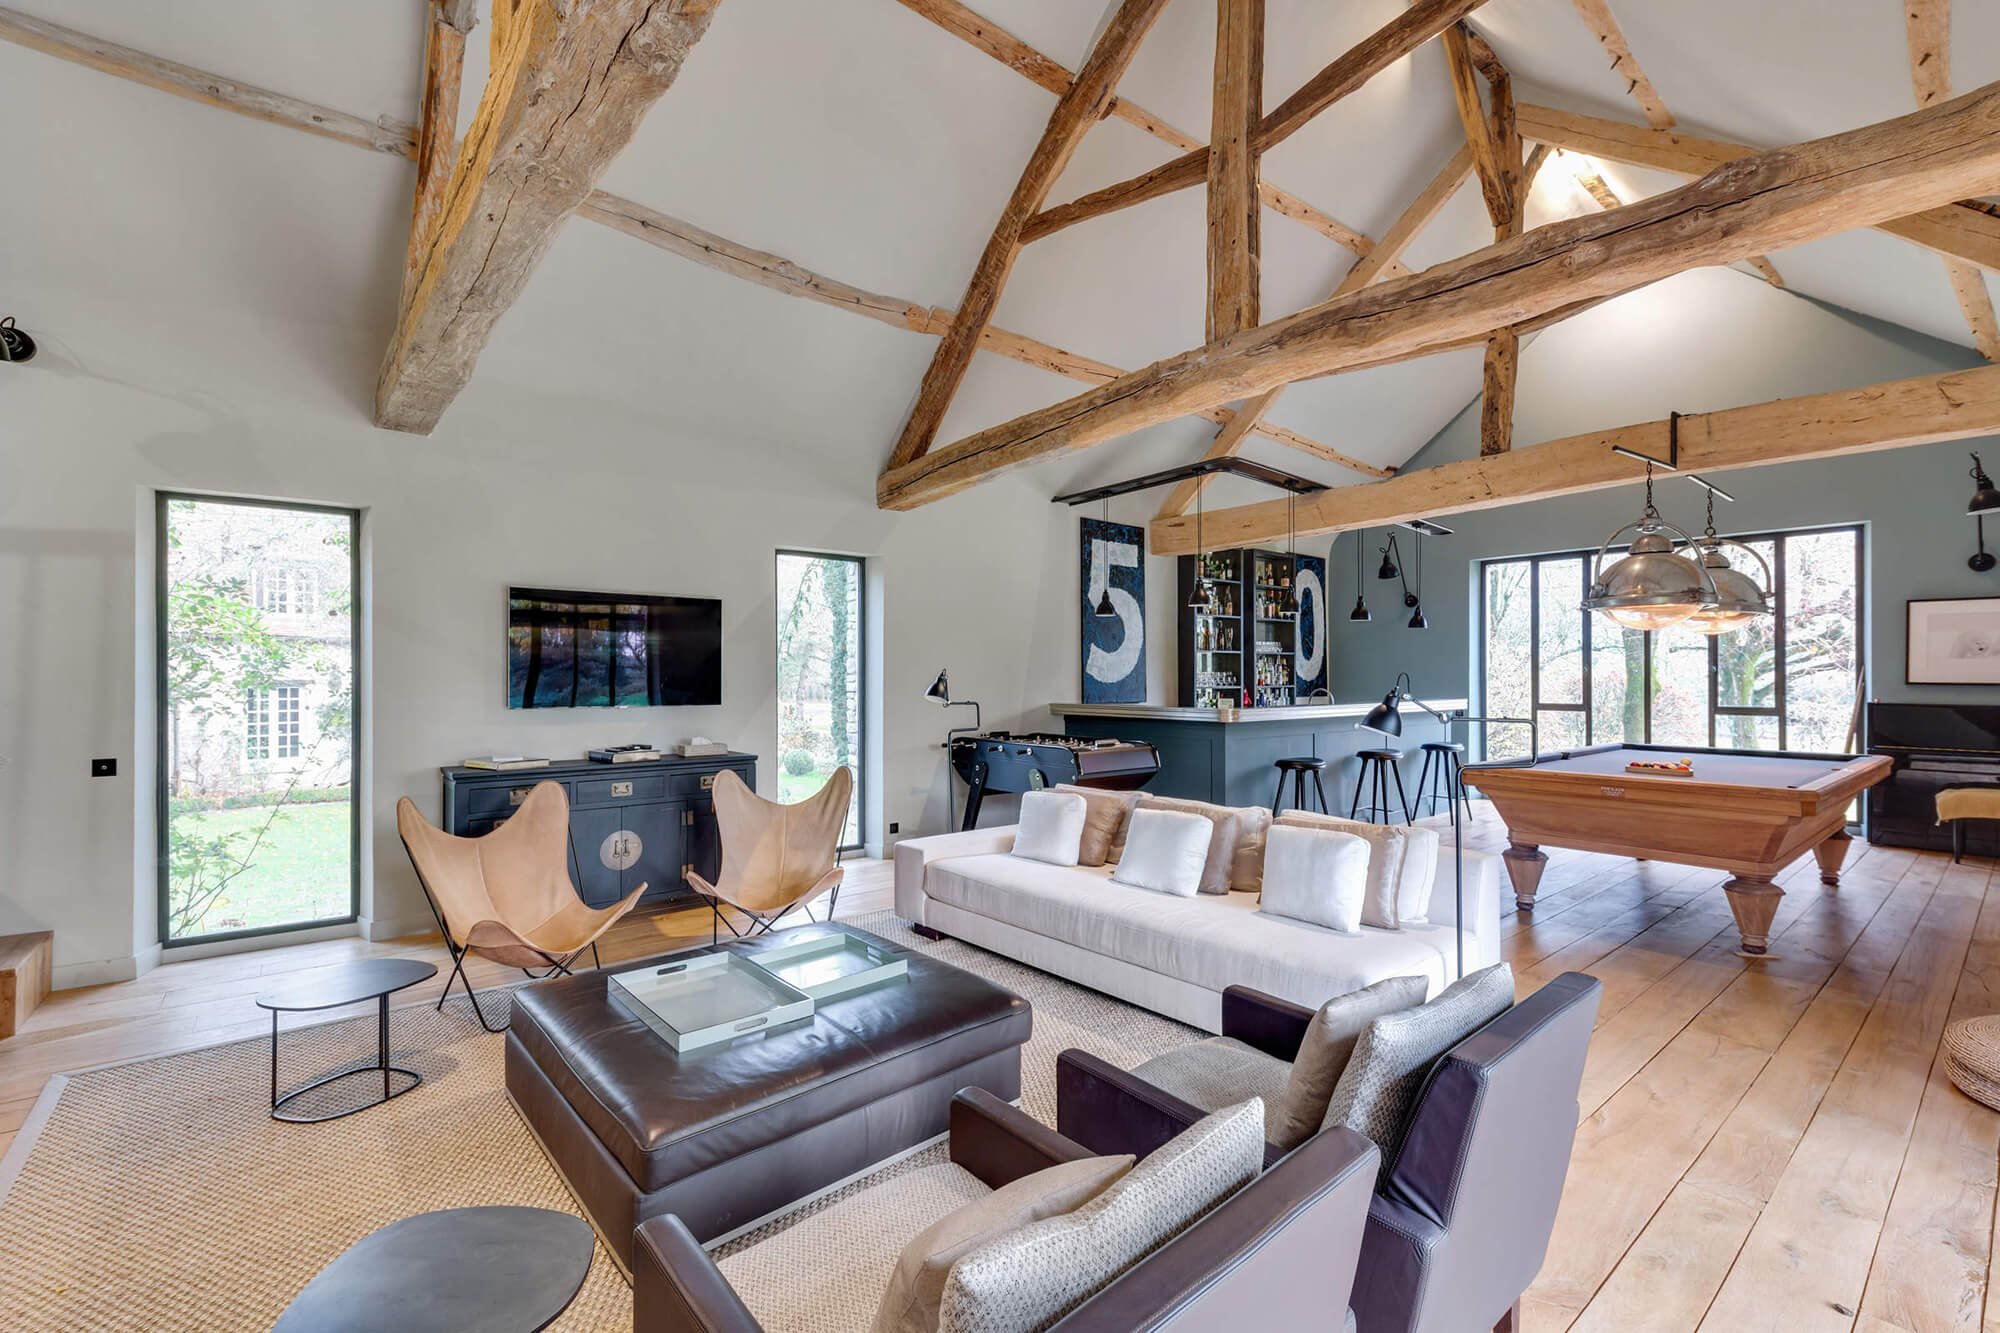 Luxury estate in the heart of the Ile de France countryside and forests 